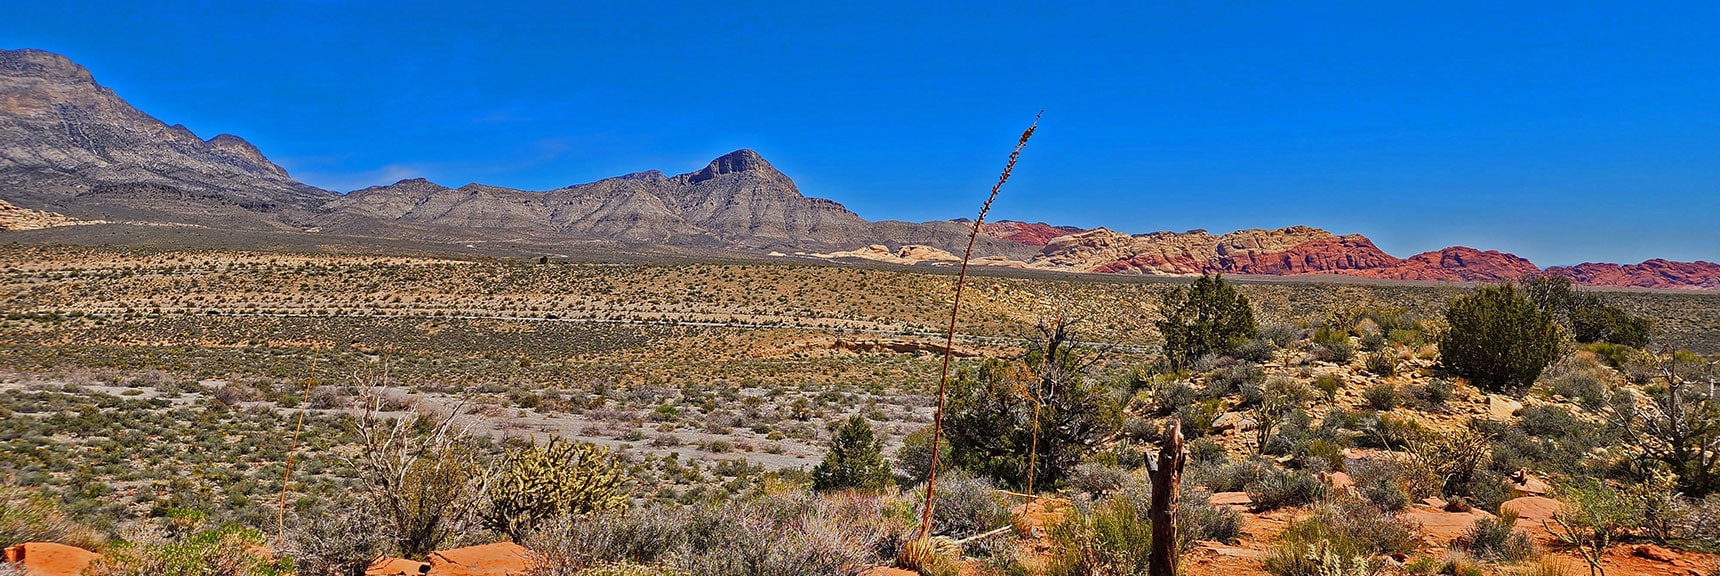 On the Southern Highpoint of the SMYC Trail. Turtlehead Peak Across Red Rock Canyon | SMYC Trail | Red Rock Canyon National Conservation Area, Nevada | David Smith | LasVegasAreaTrails.com